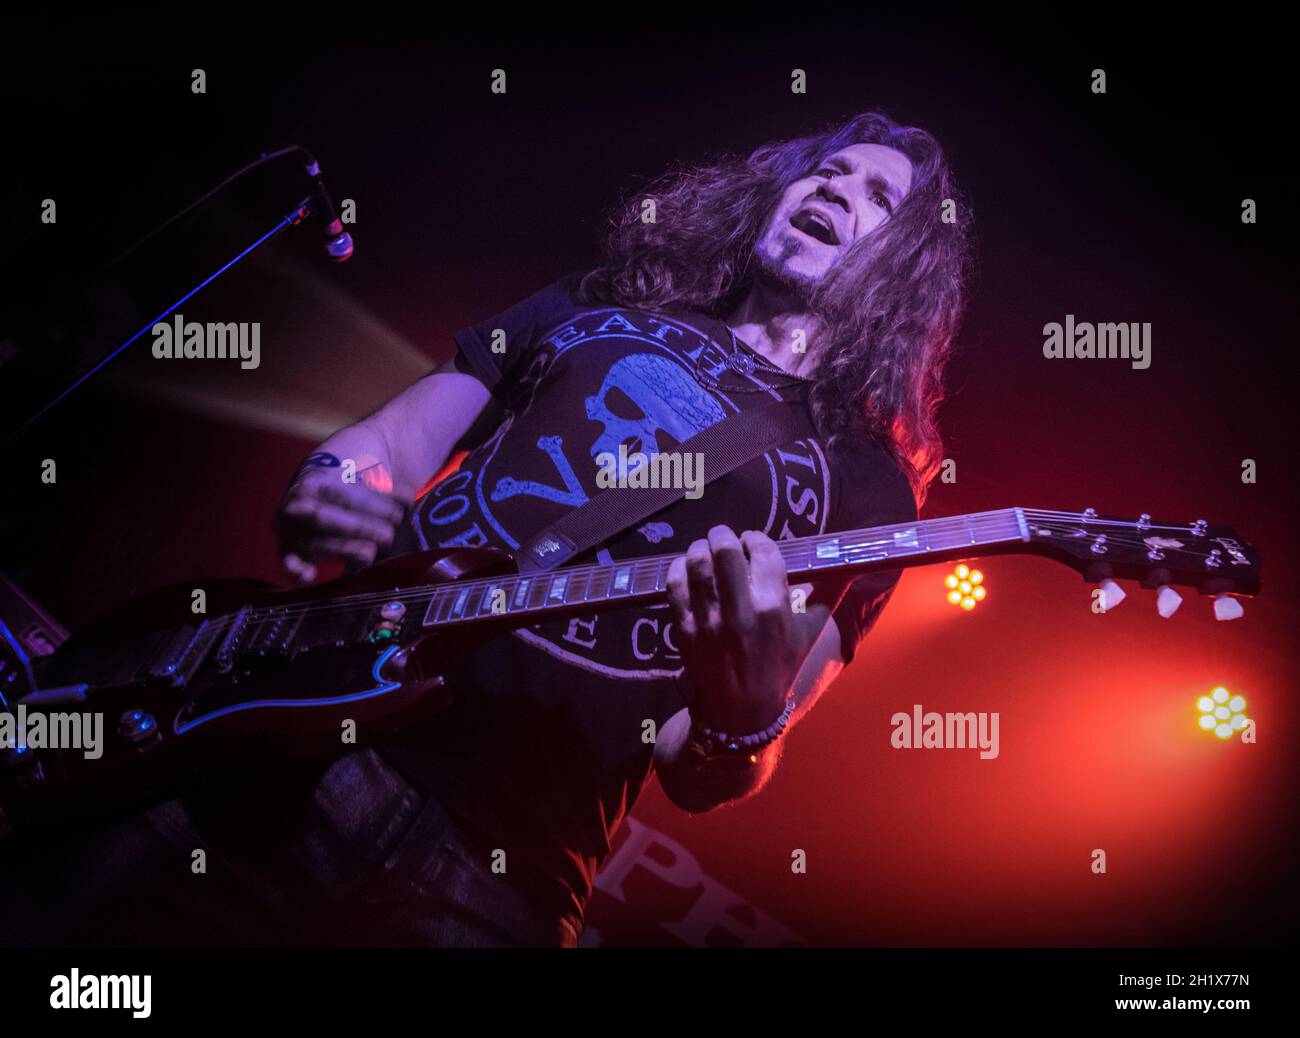 Phil X & The Drills live in concert at Birmingham O2 Academy 3, UK, March 12th, 2020. Live music photography. Stock Photo